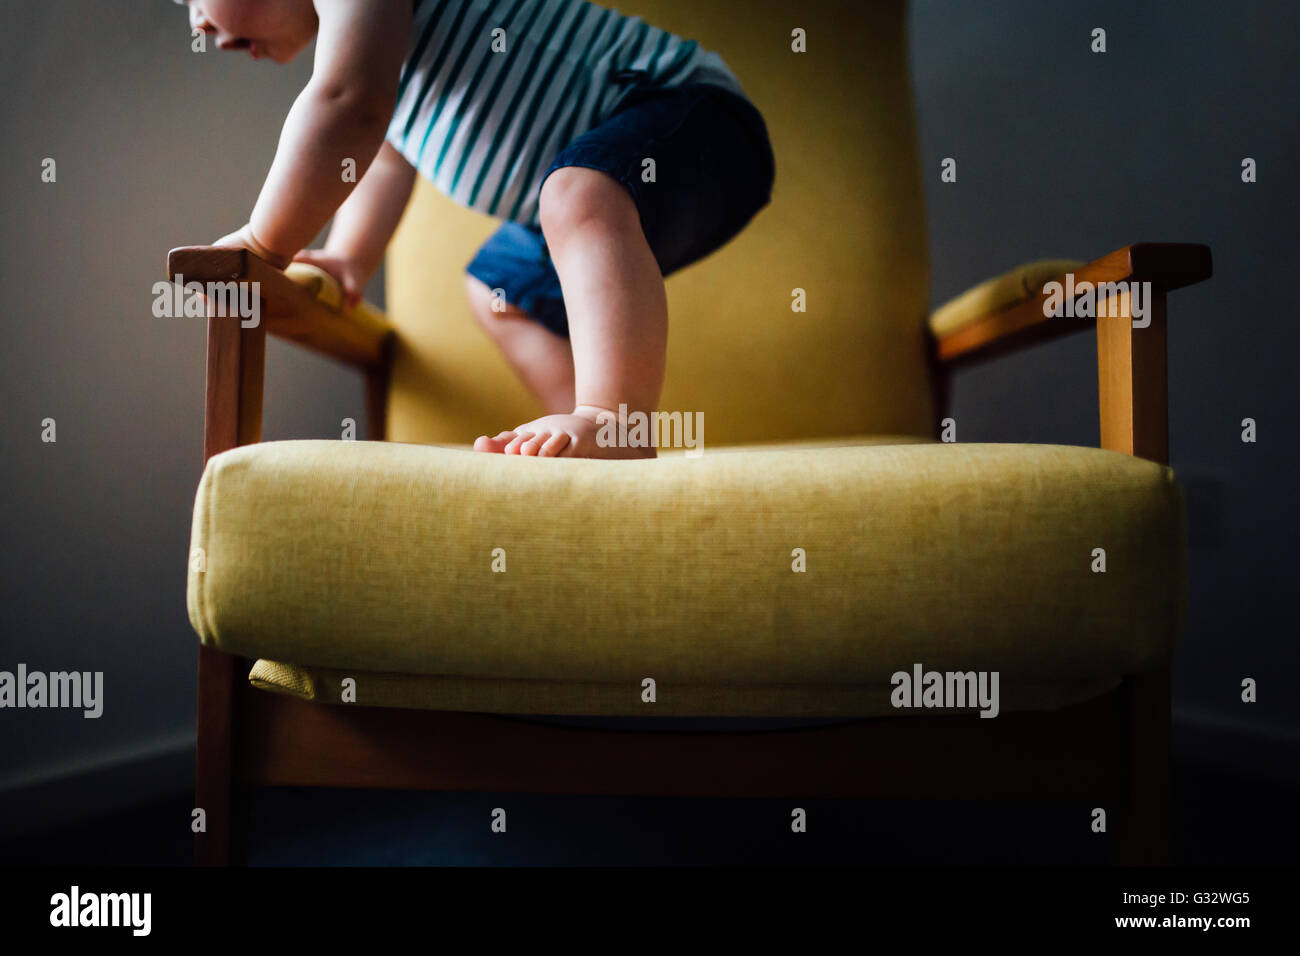 Baby boy standing on chair Stock Photo